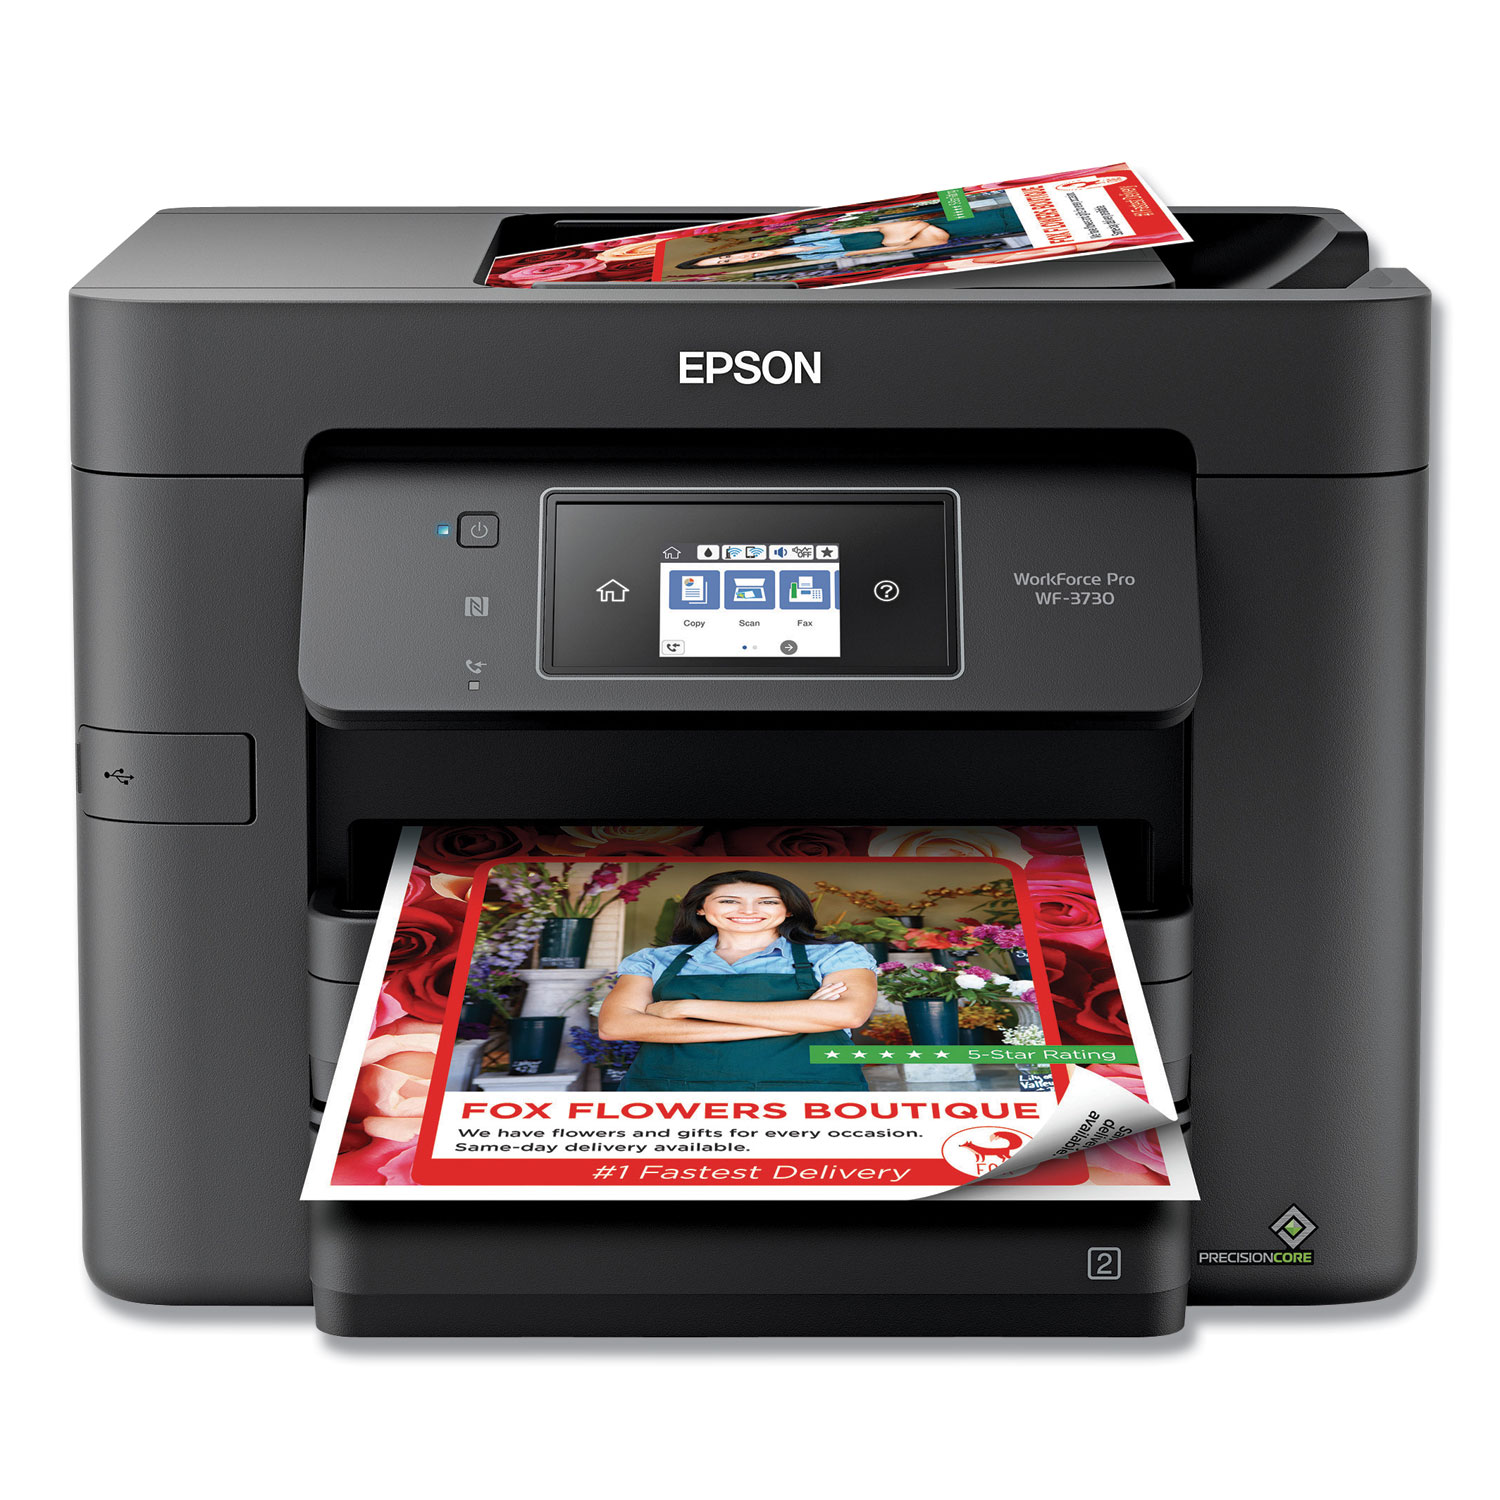  Epson C11CH04201 WorkForce Pro WF-3730 All-in-One Printer, Copy/Fax/Print/Scan (EPSC11CH04201) 